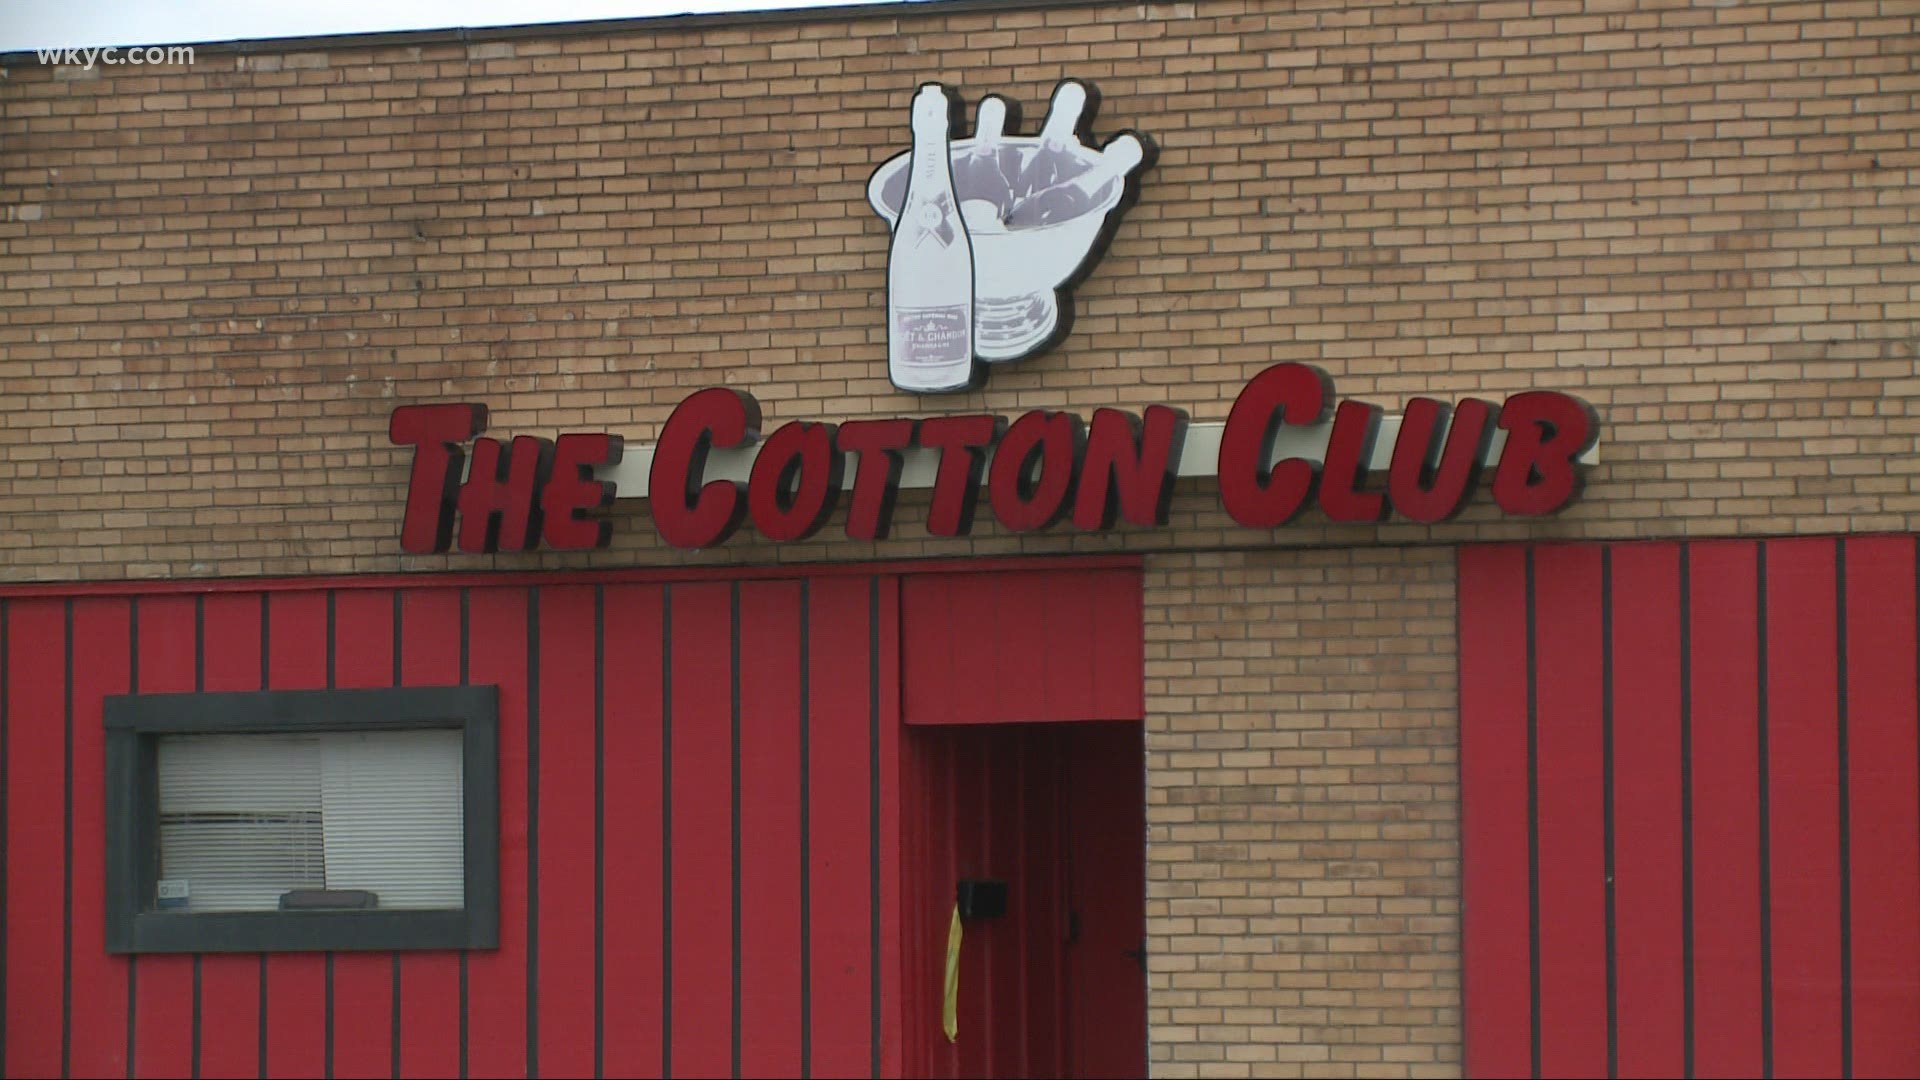 A gunman shot 3 people at the Cotton Club in Lorain, Ohio.  A 19-year-old male inside the bar who had sustained multiple gunshot wounds.